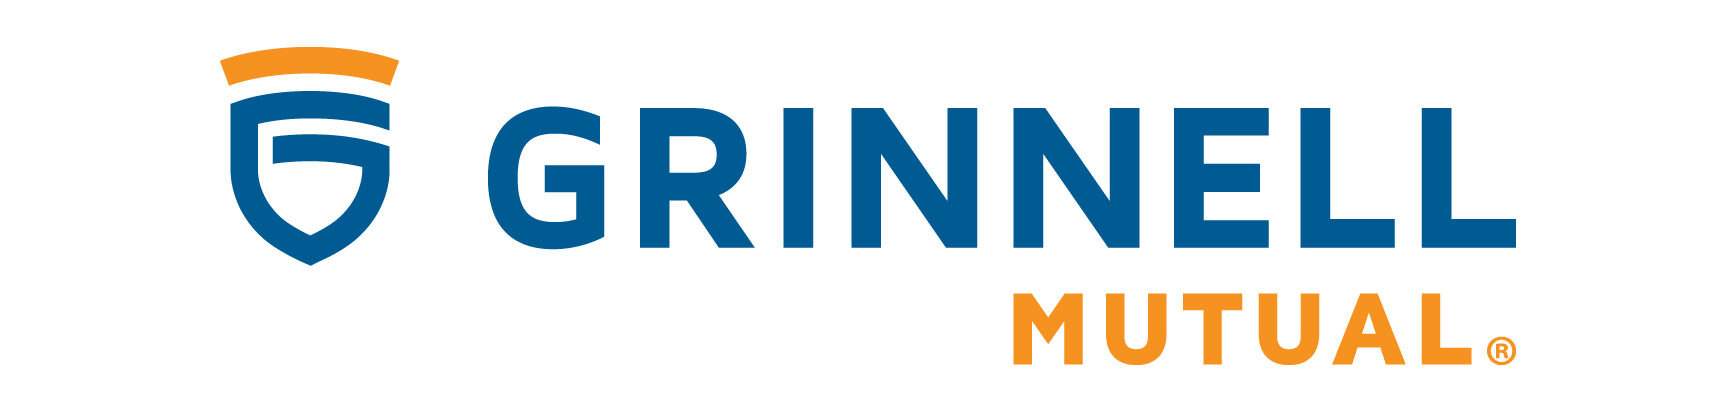 Logo of a company called "Grinnell Mutual" The first word is in the color dark blue and the latter is in orange font- first priority insurance